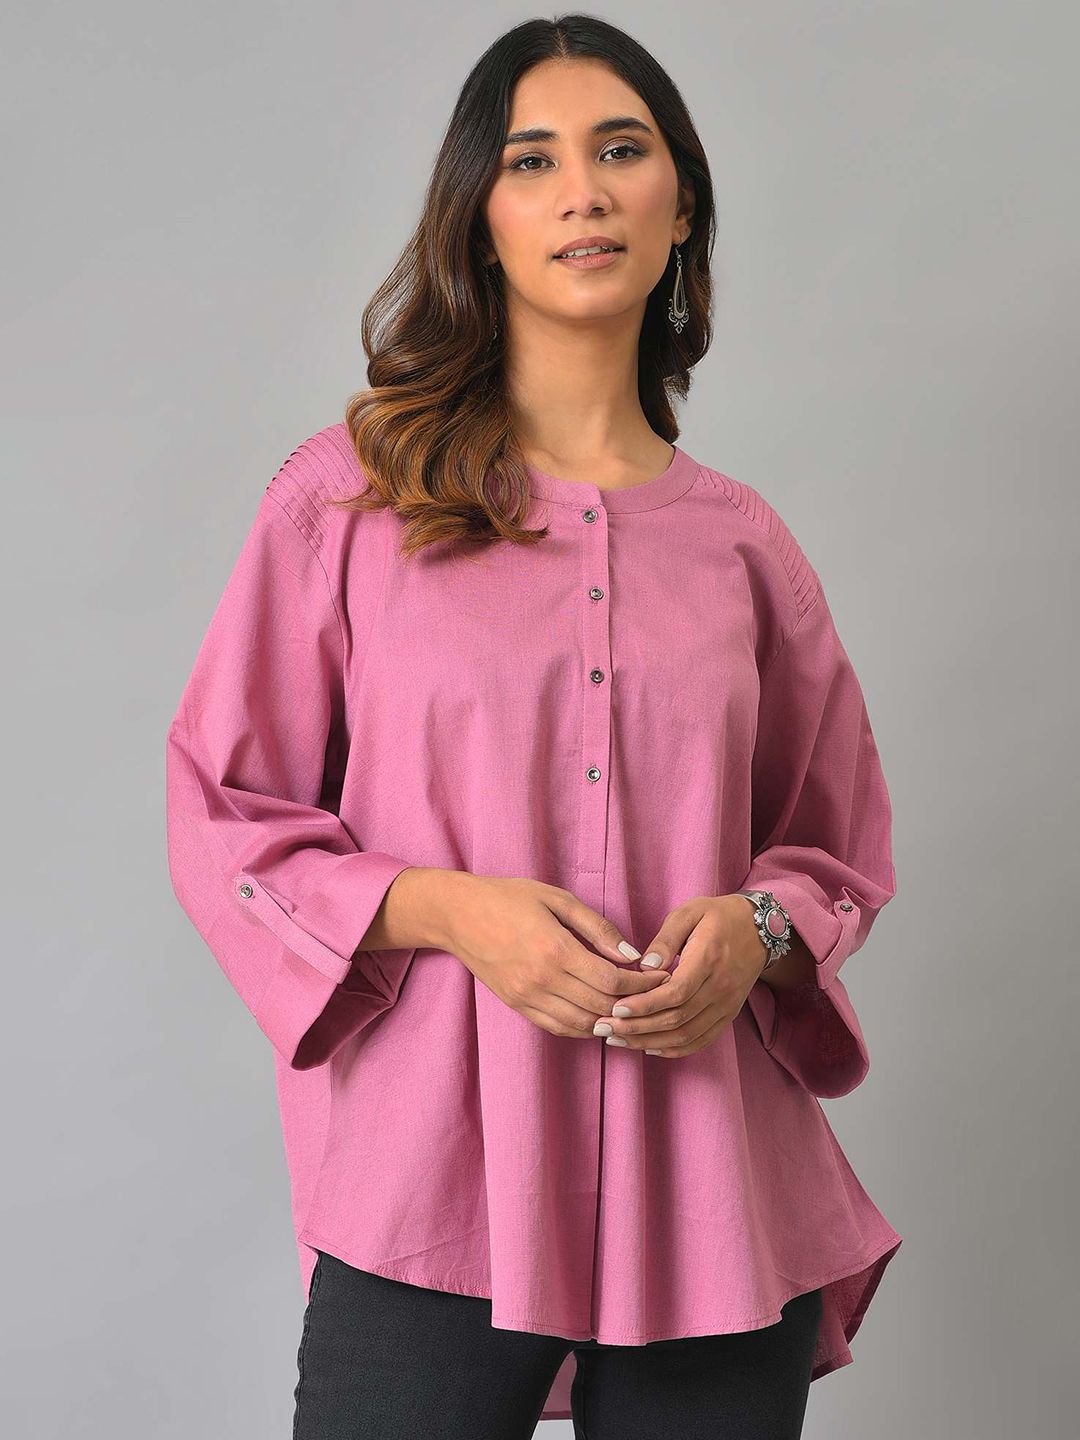 W Plus Size Cotton Shirt Style Top Price in India